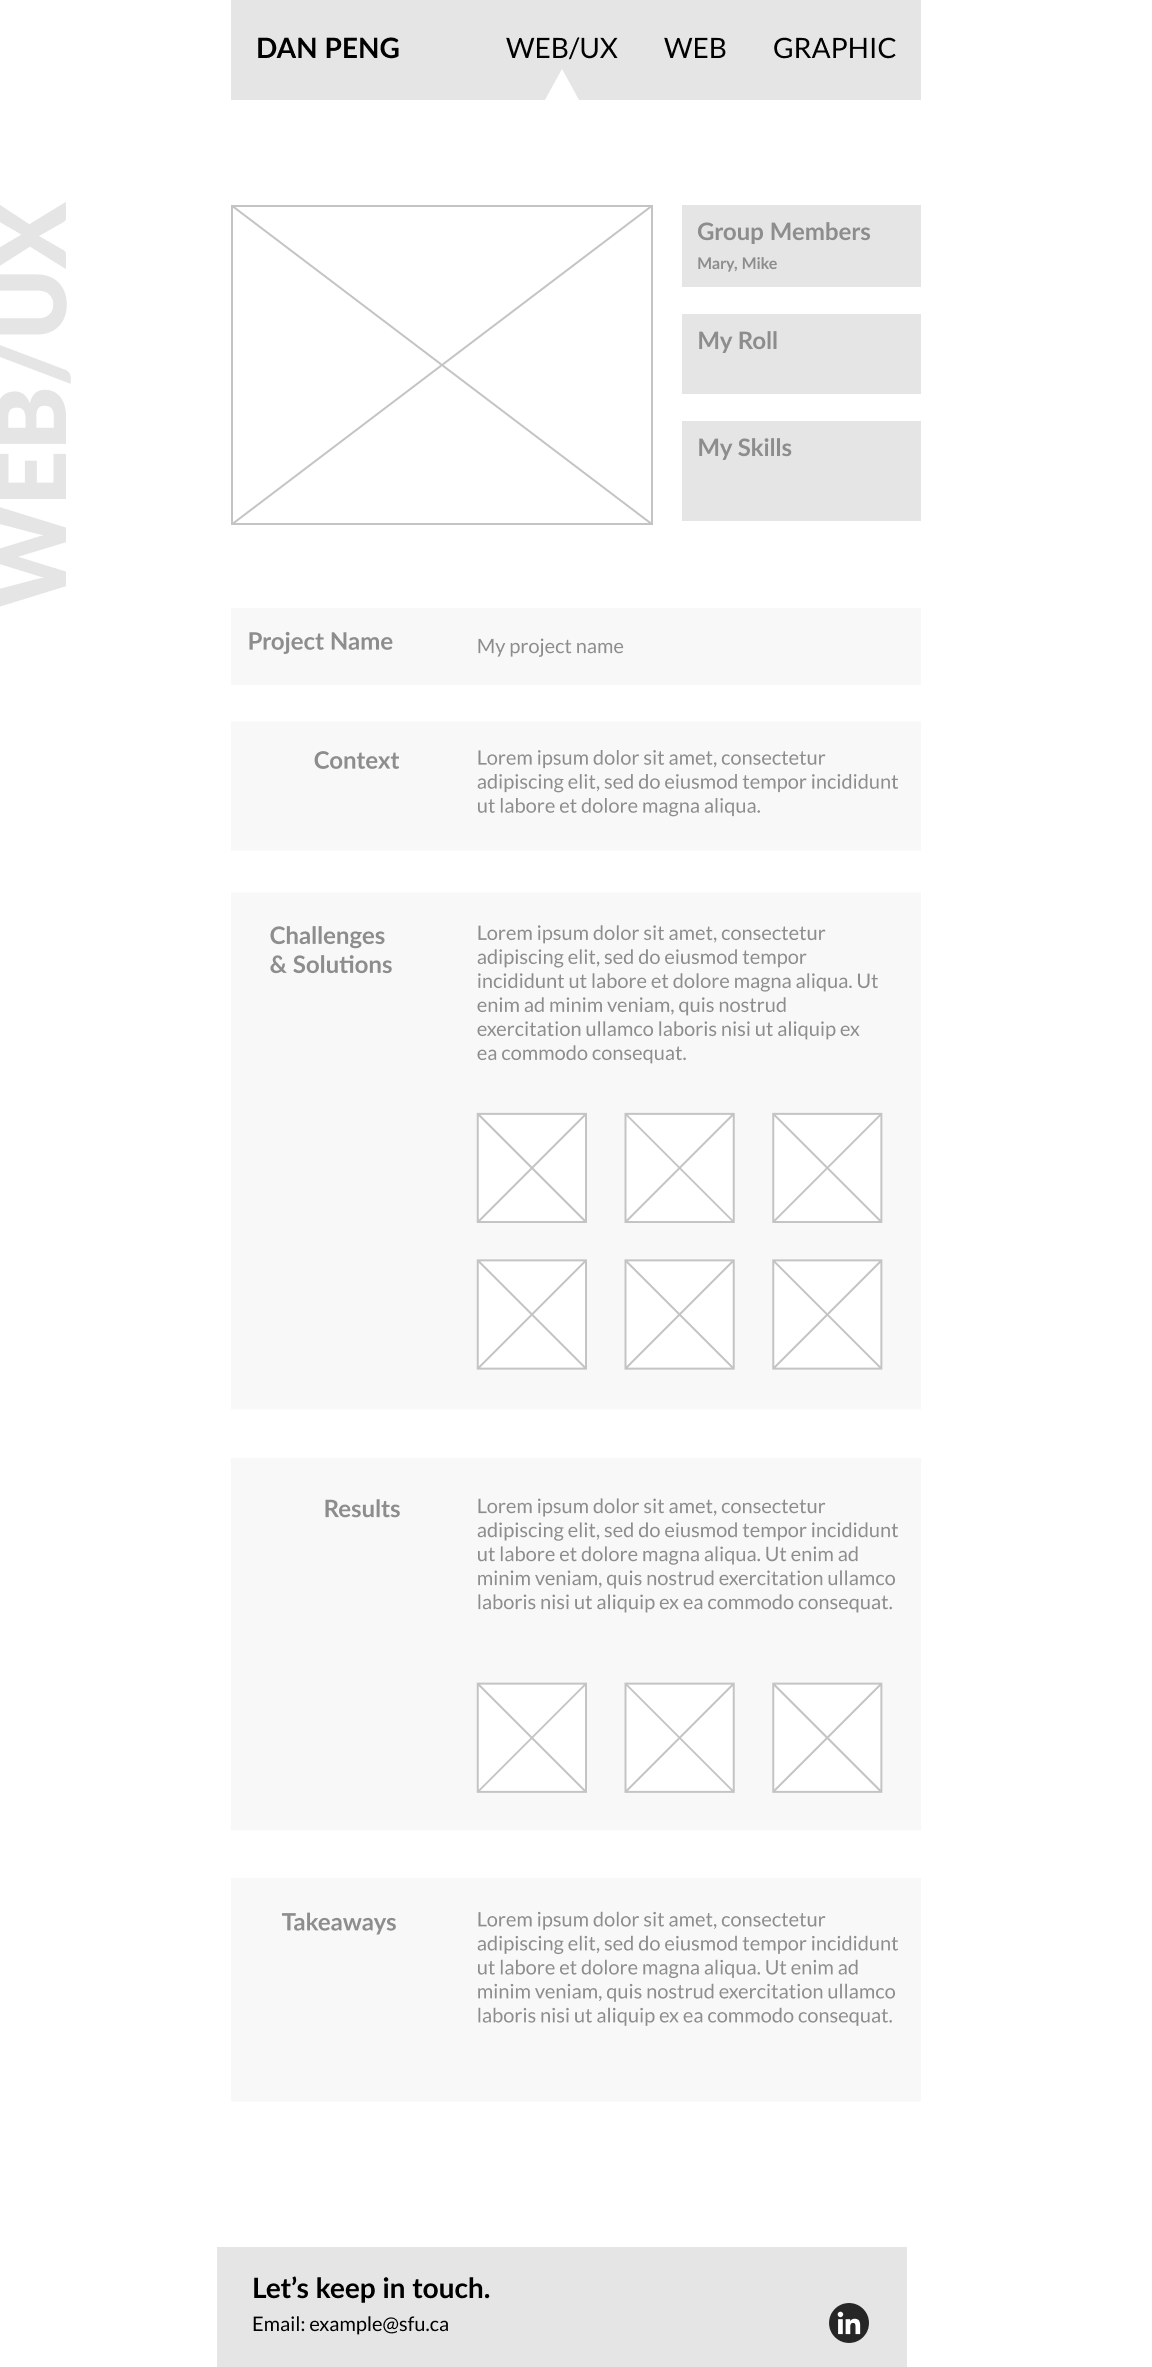 The wireframe of project intro page